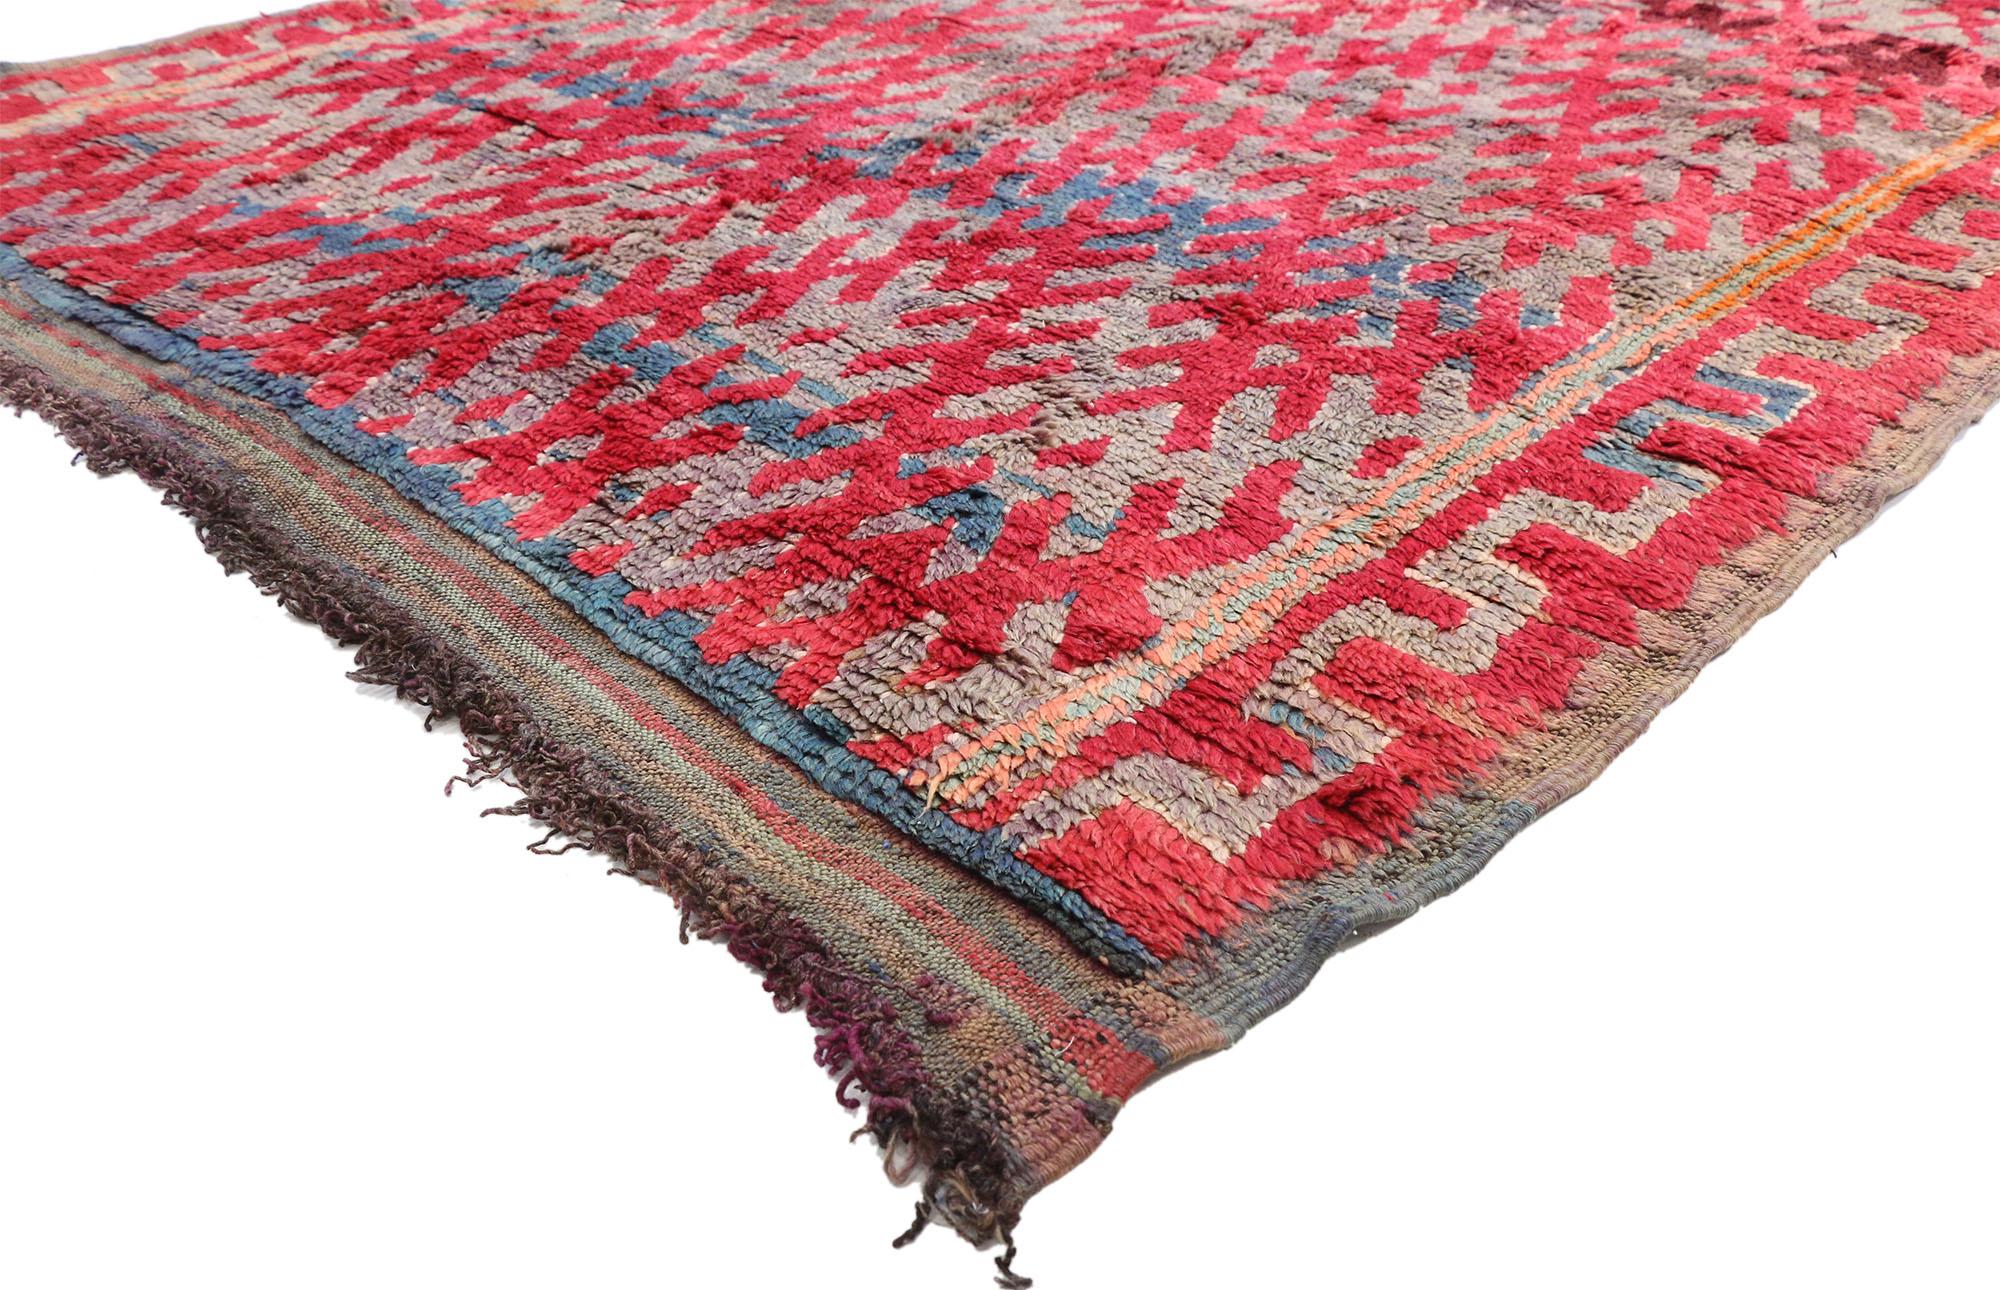 Vintage Moroccan Rug, Berber Moroccan Rug with Vibrant Mid-Century Modern Style 3